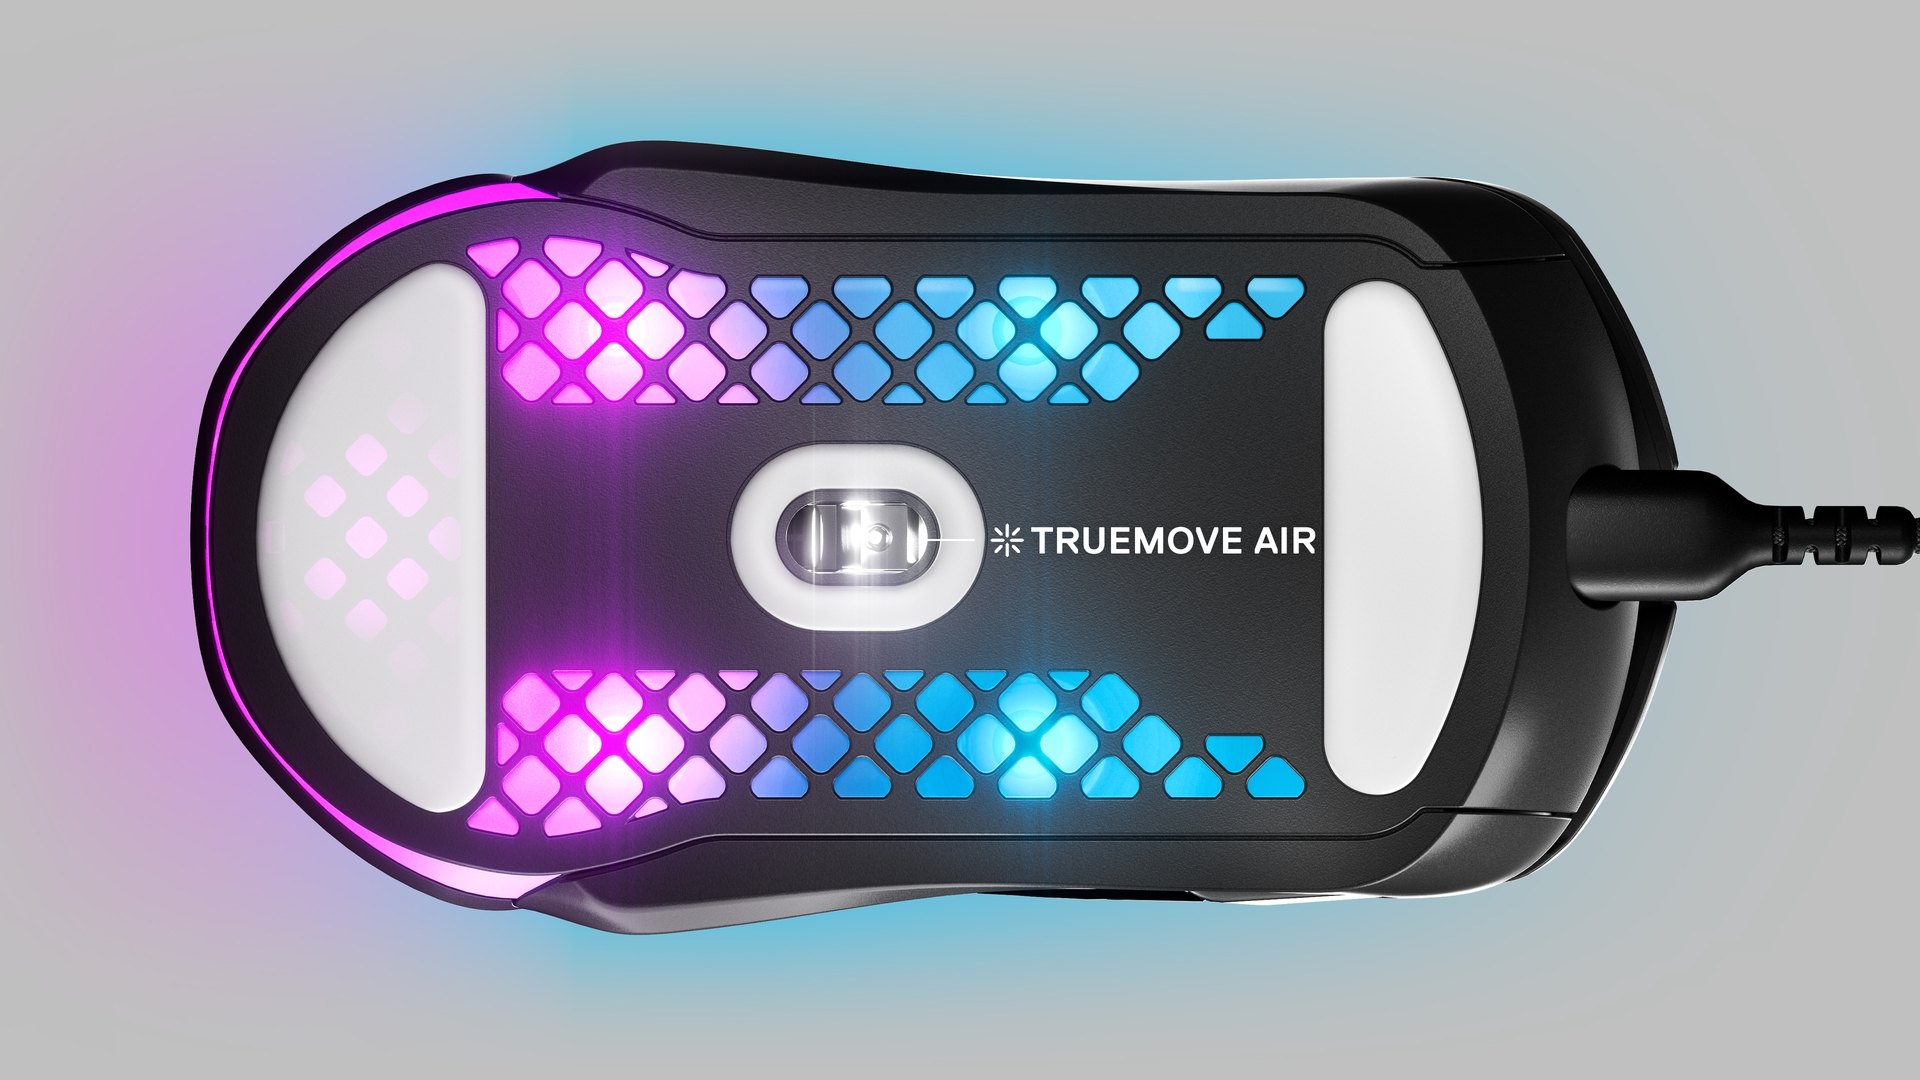 An Aerox 5 mouse shown from beneath with a great view into the sensor and bottom glide skates of the mouse. Text with an arrow pointing to the sensor reads "Truemove Air".